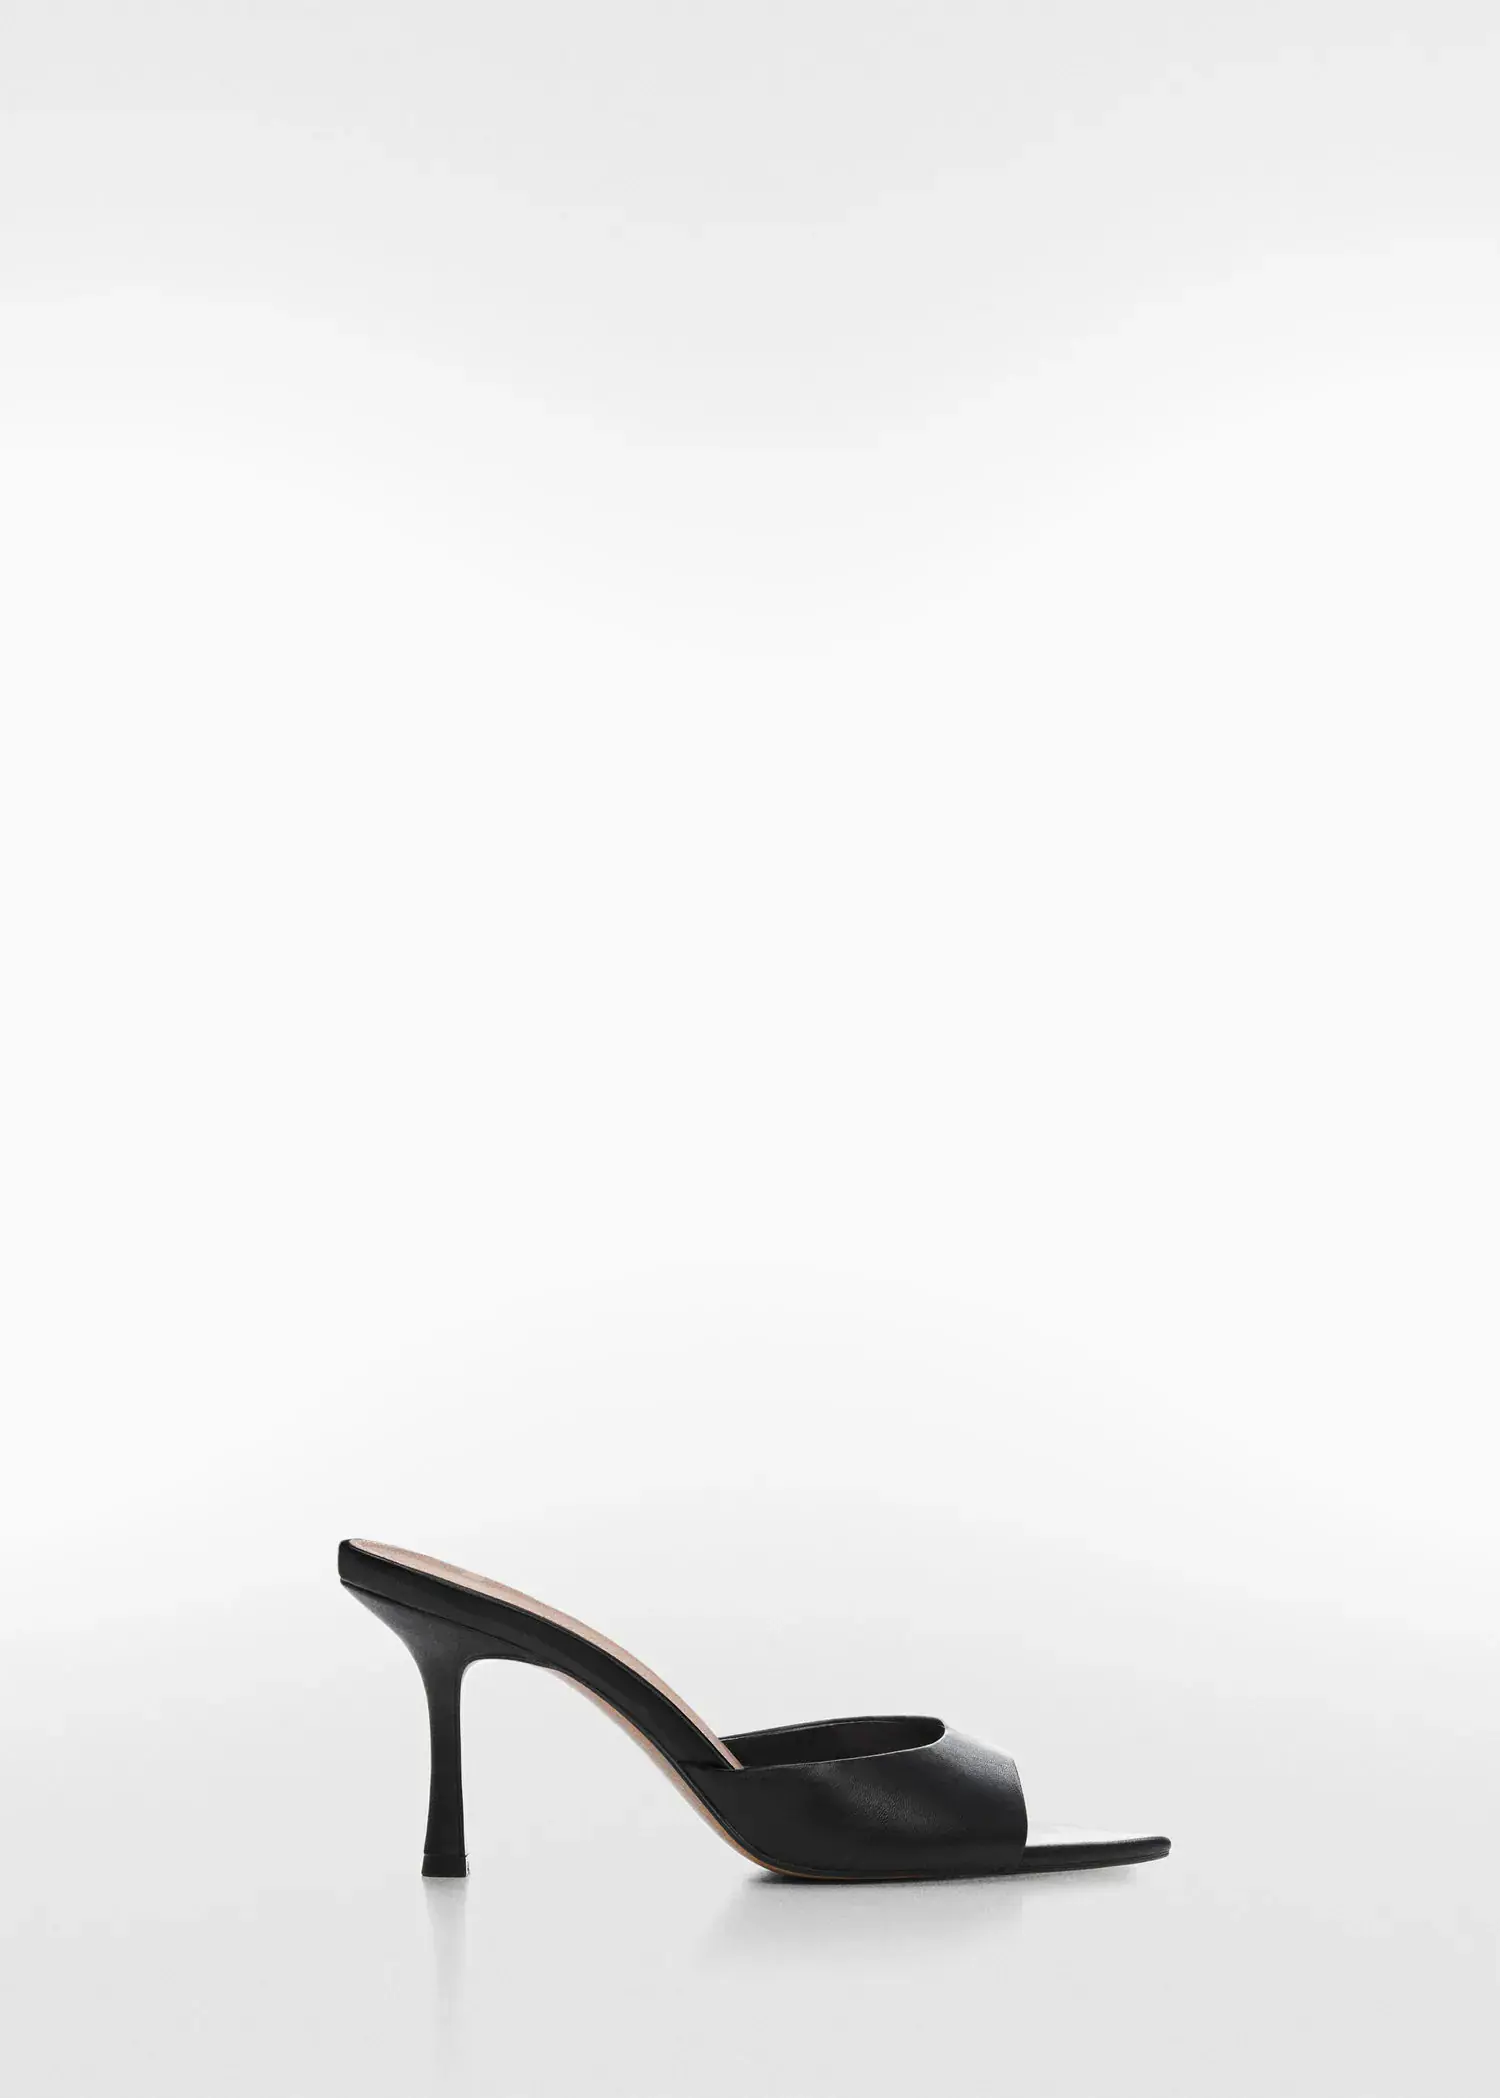 Mango Heel non-structured sandals. a pair of black high heeled shoes against a white background. 